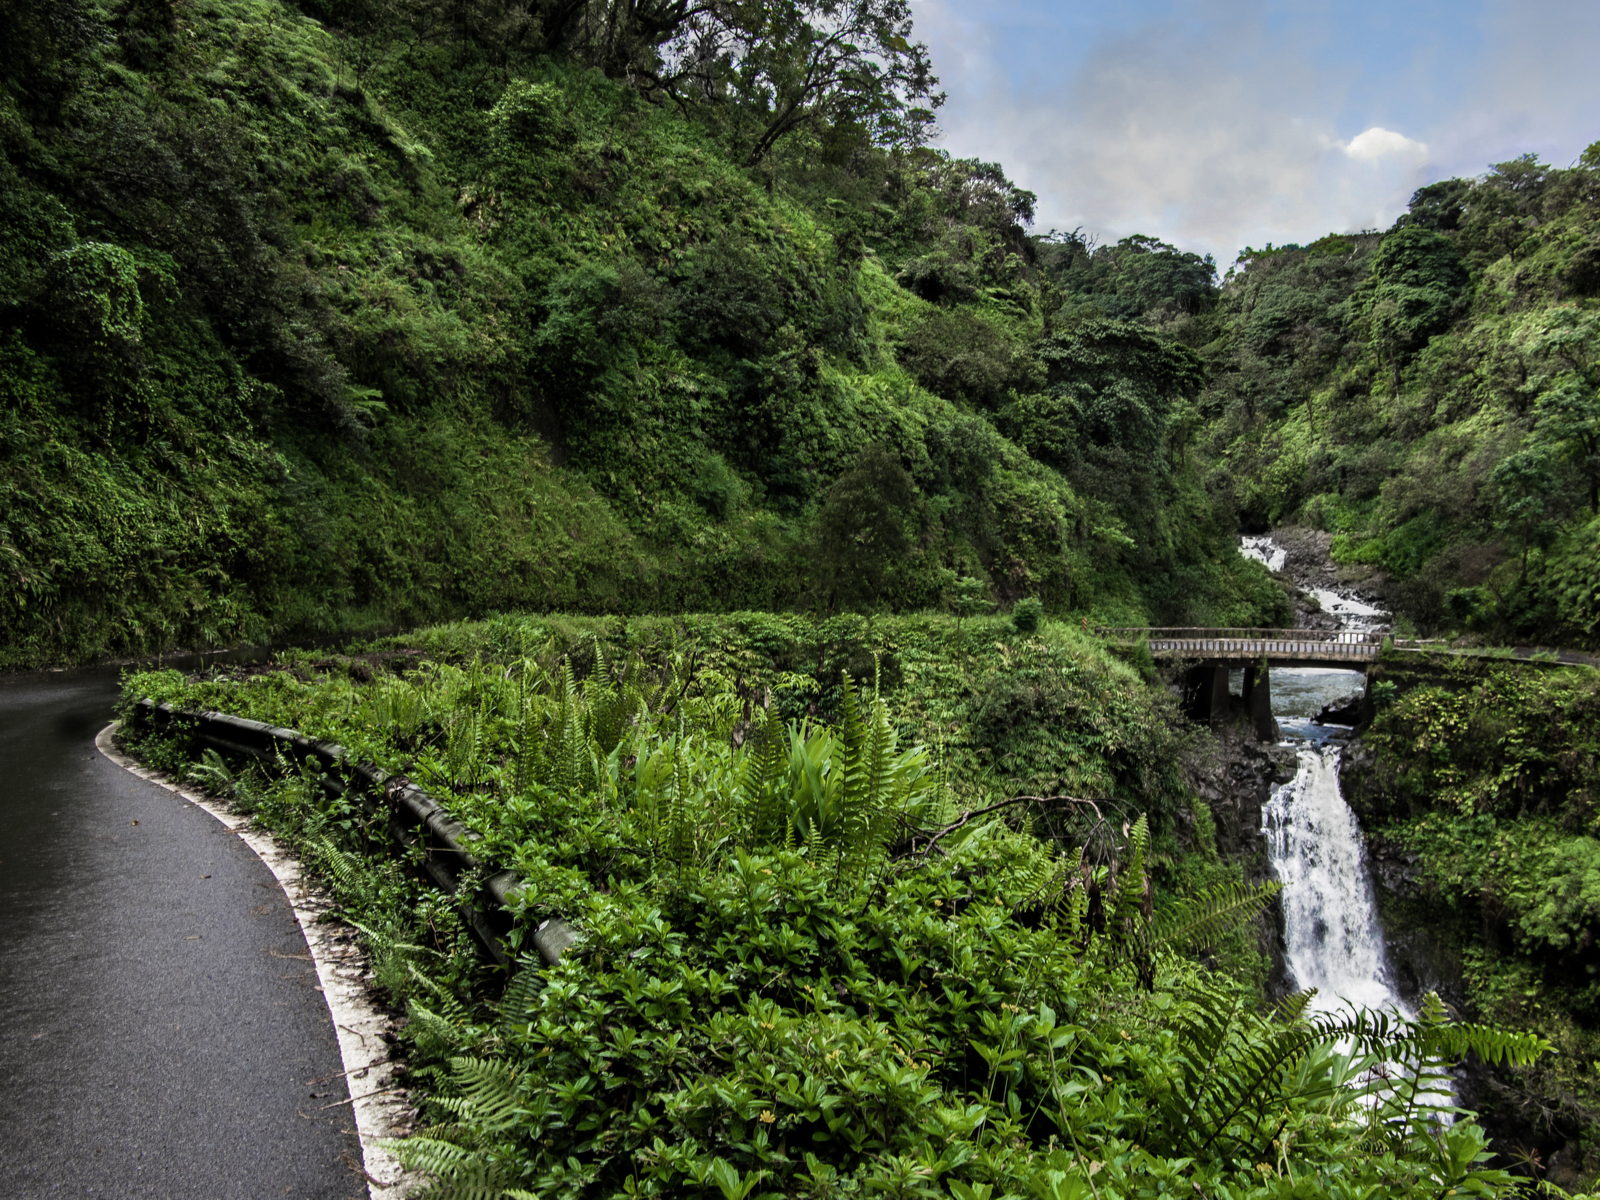 One of the best things to do in Maui, the Road to Hana where the street turns into a one lane road over a bridge